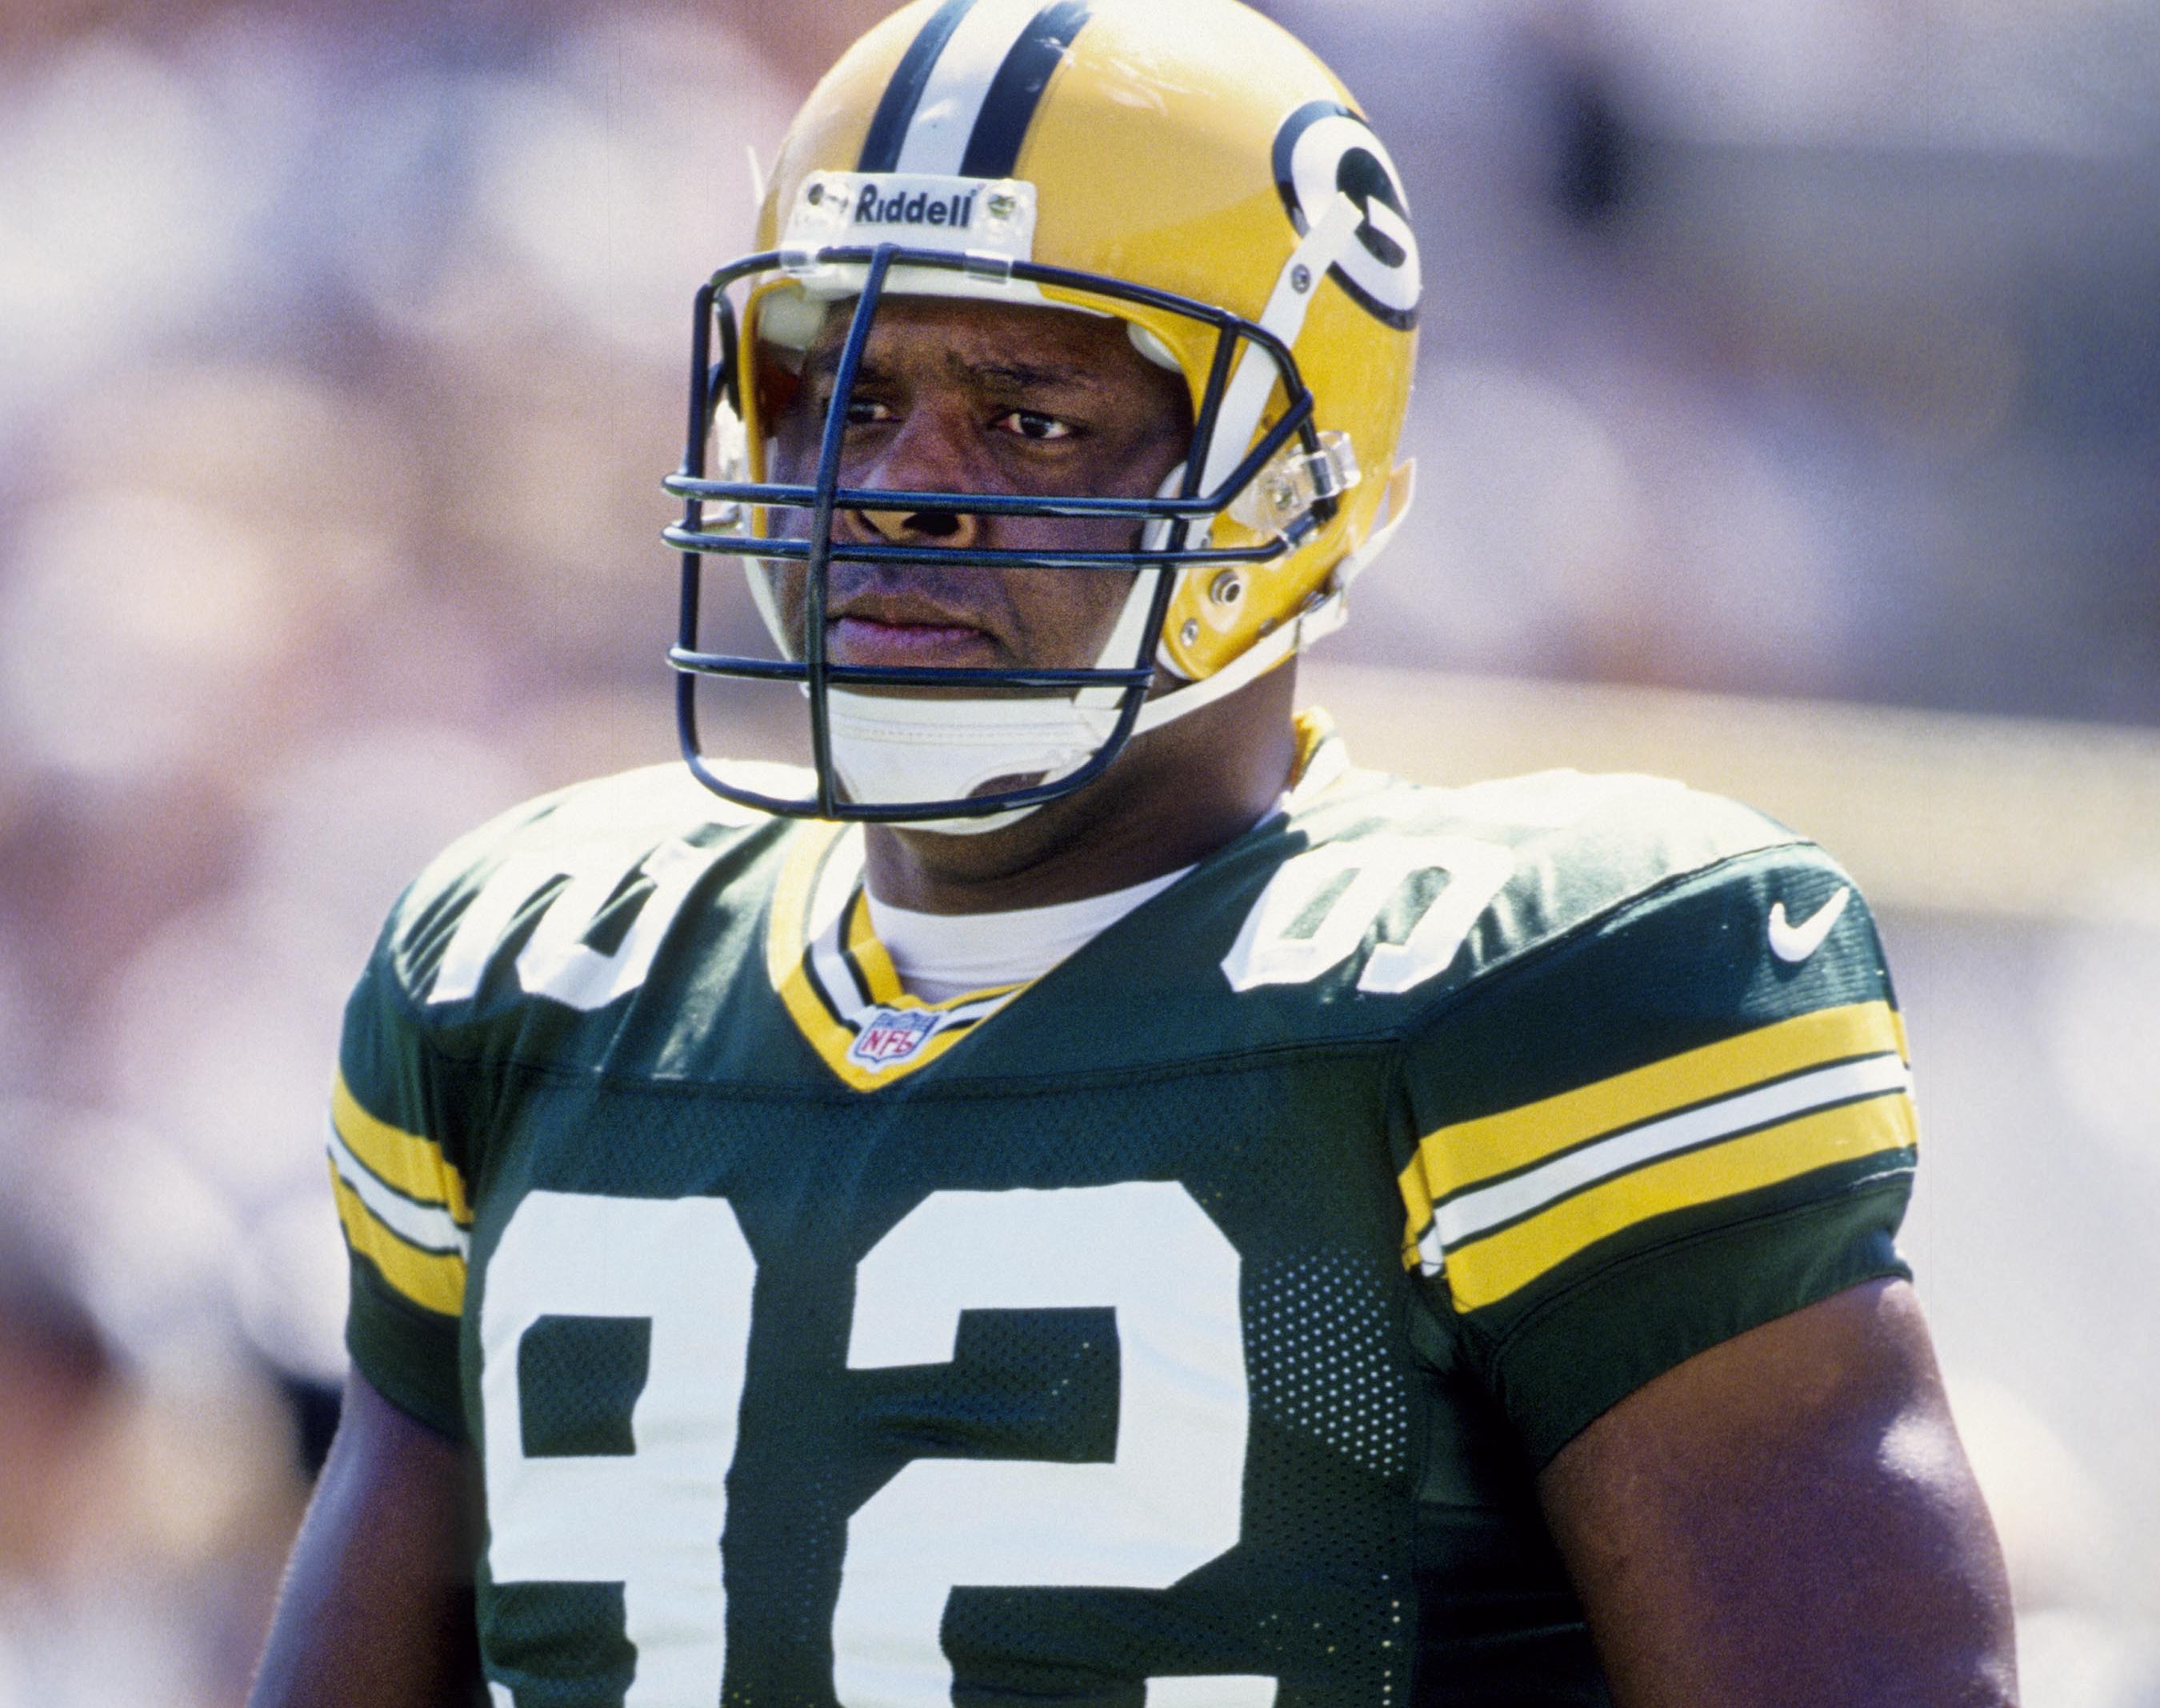 Willie Davis is the Green Bay Packers' all-time leader in sacks